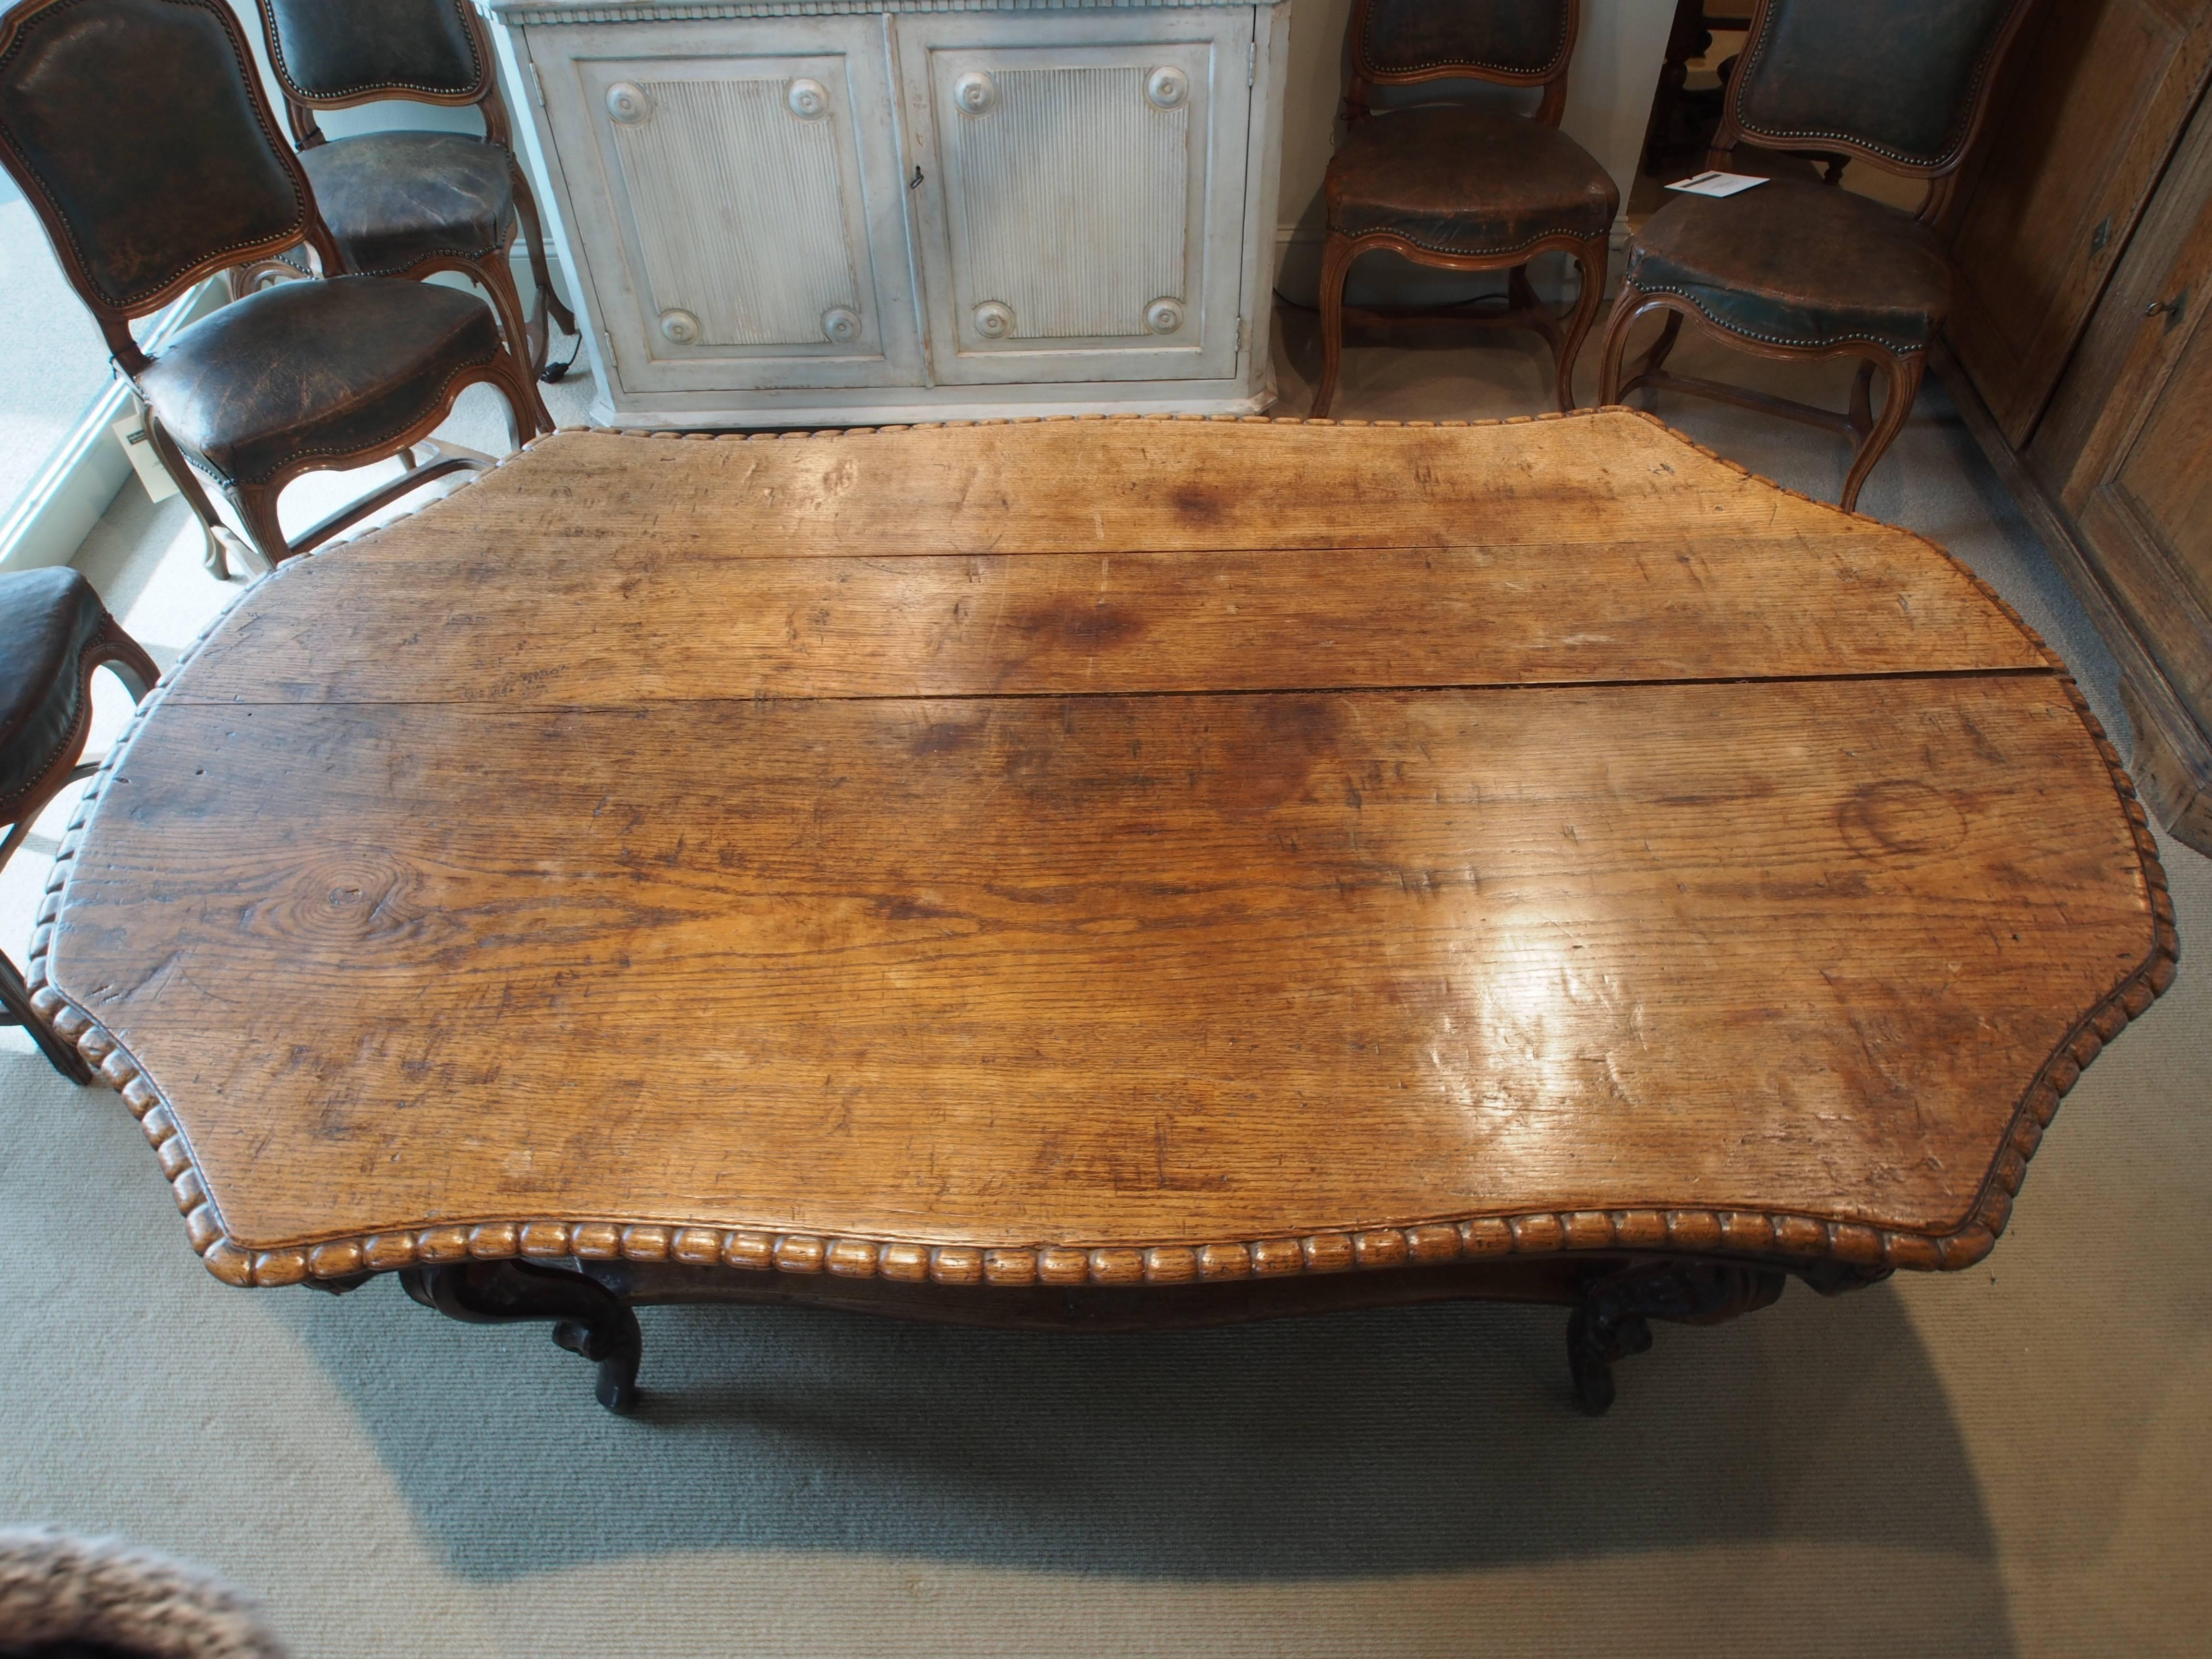 Italian Walnut Carved Table, 19th Century, with 8 Curved Legs and Low Shelf For Sale 7